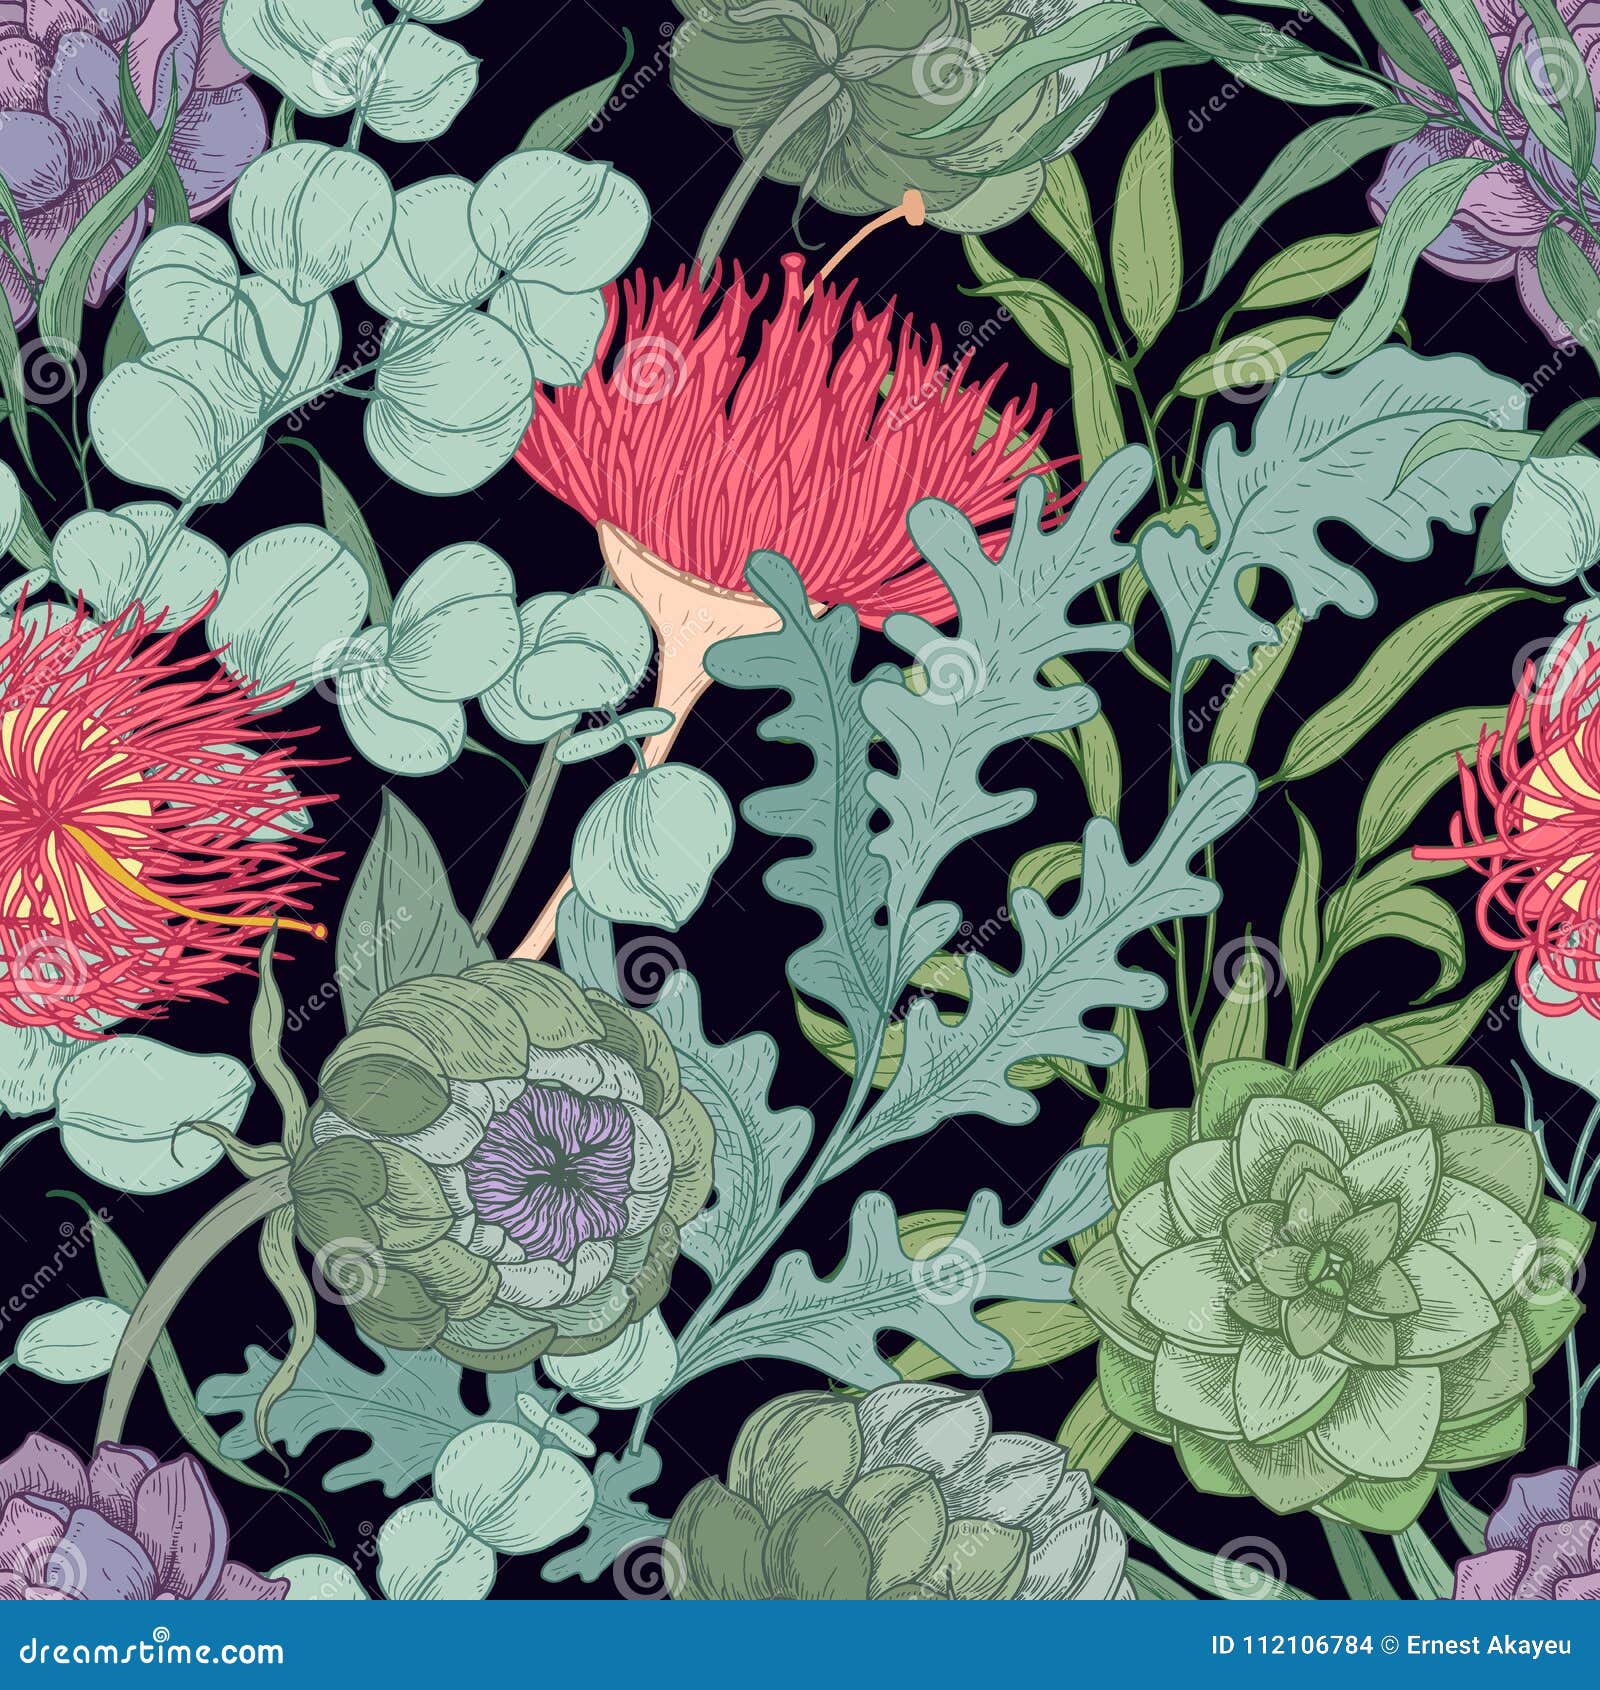 romantic seamless pattern with wild blooming flowers and herbs used in floristry hand drawn on black background